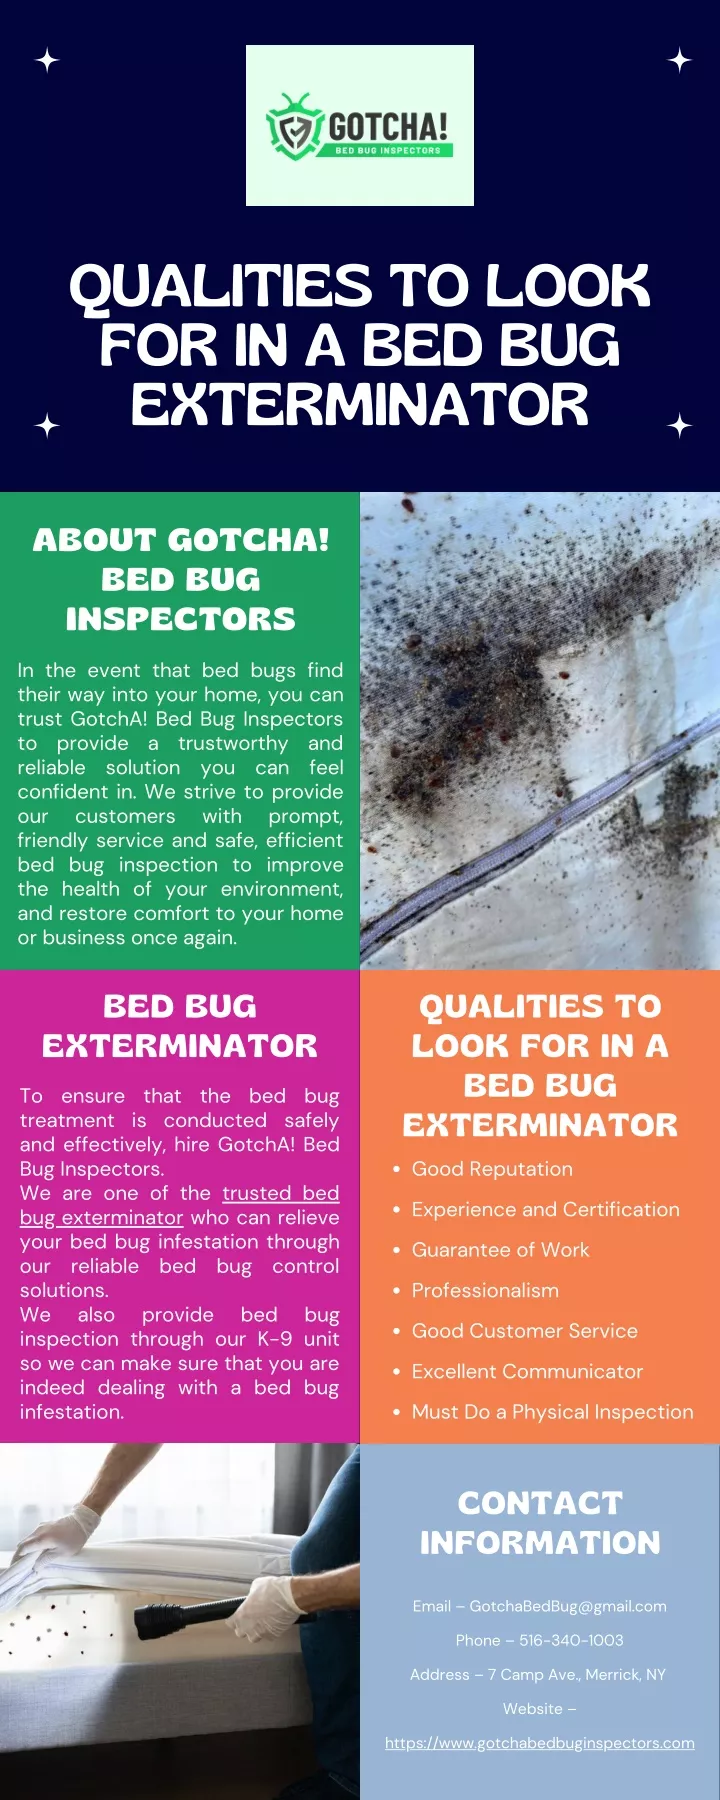 qualities to look for in a bed bug exterminator